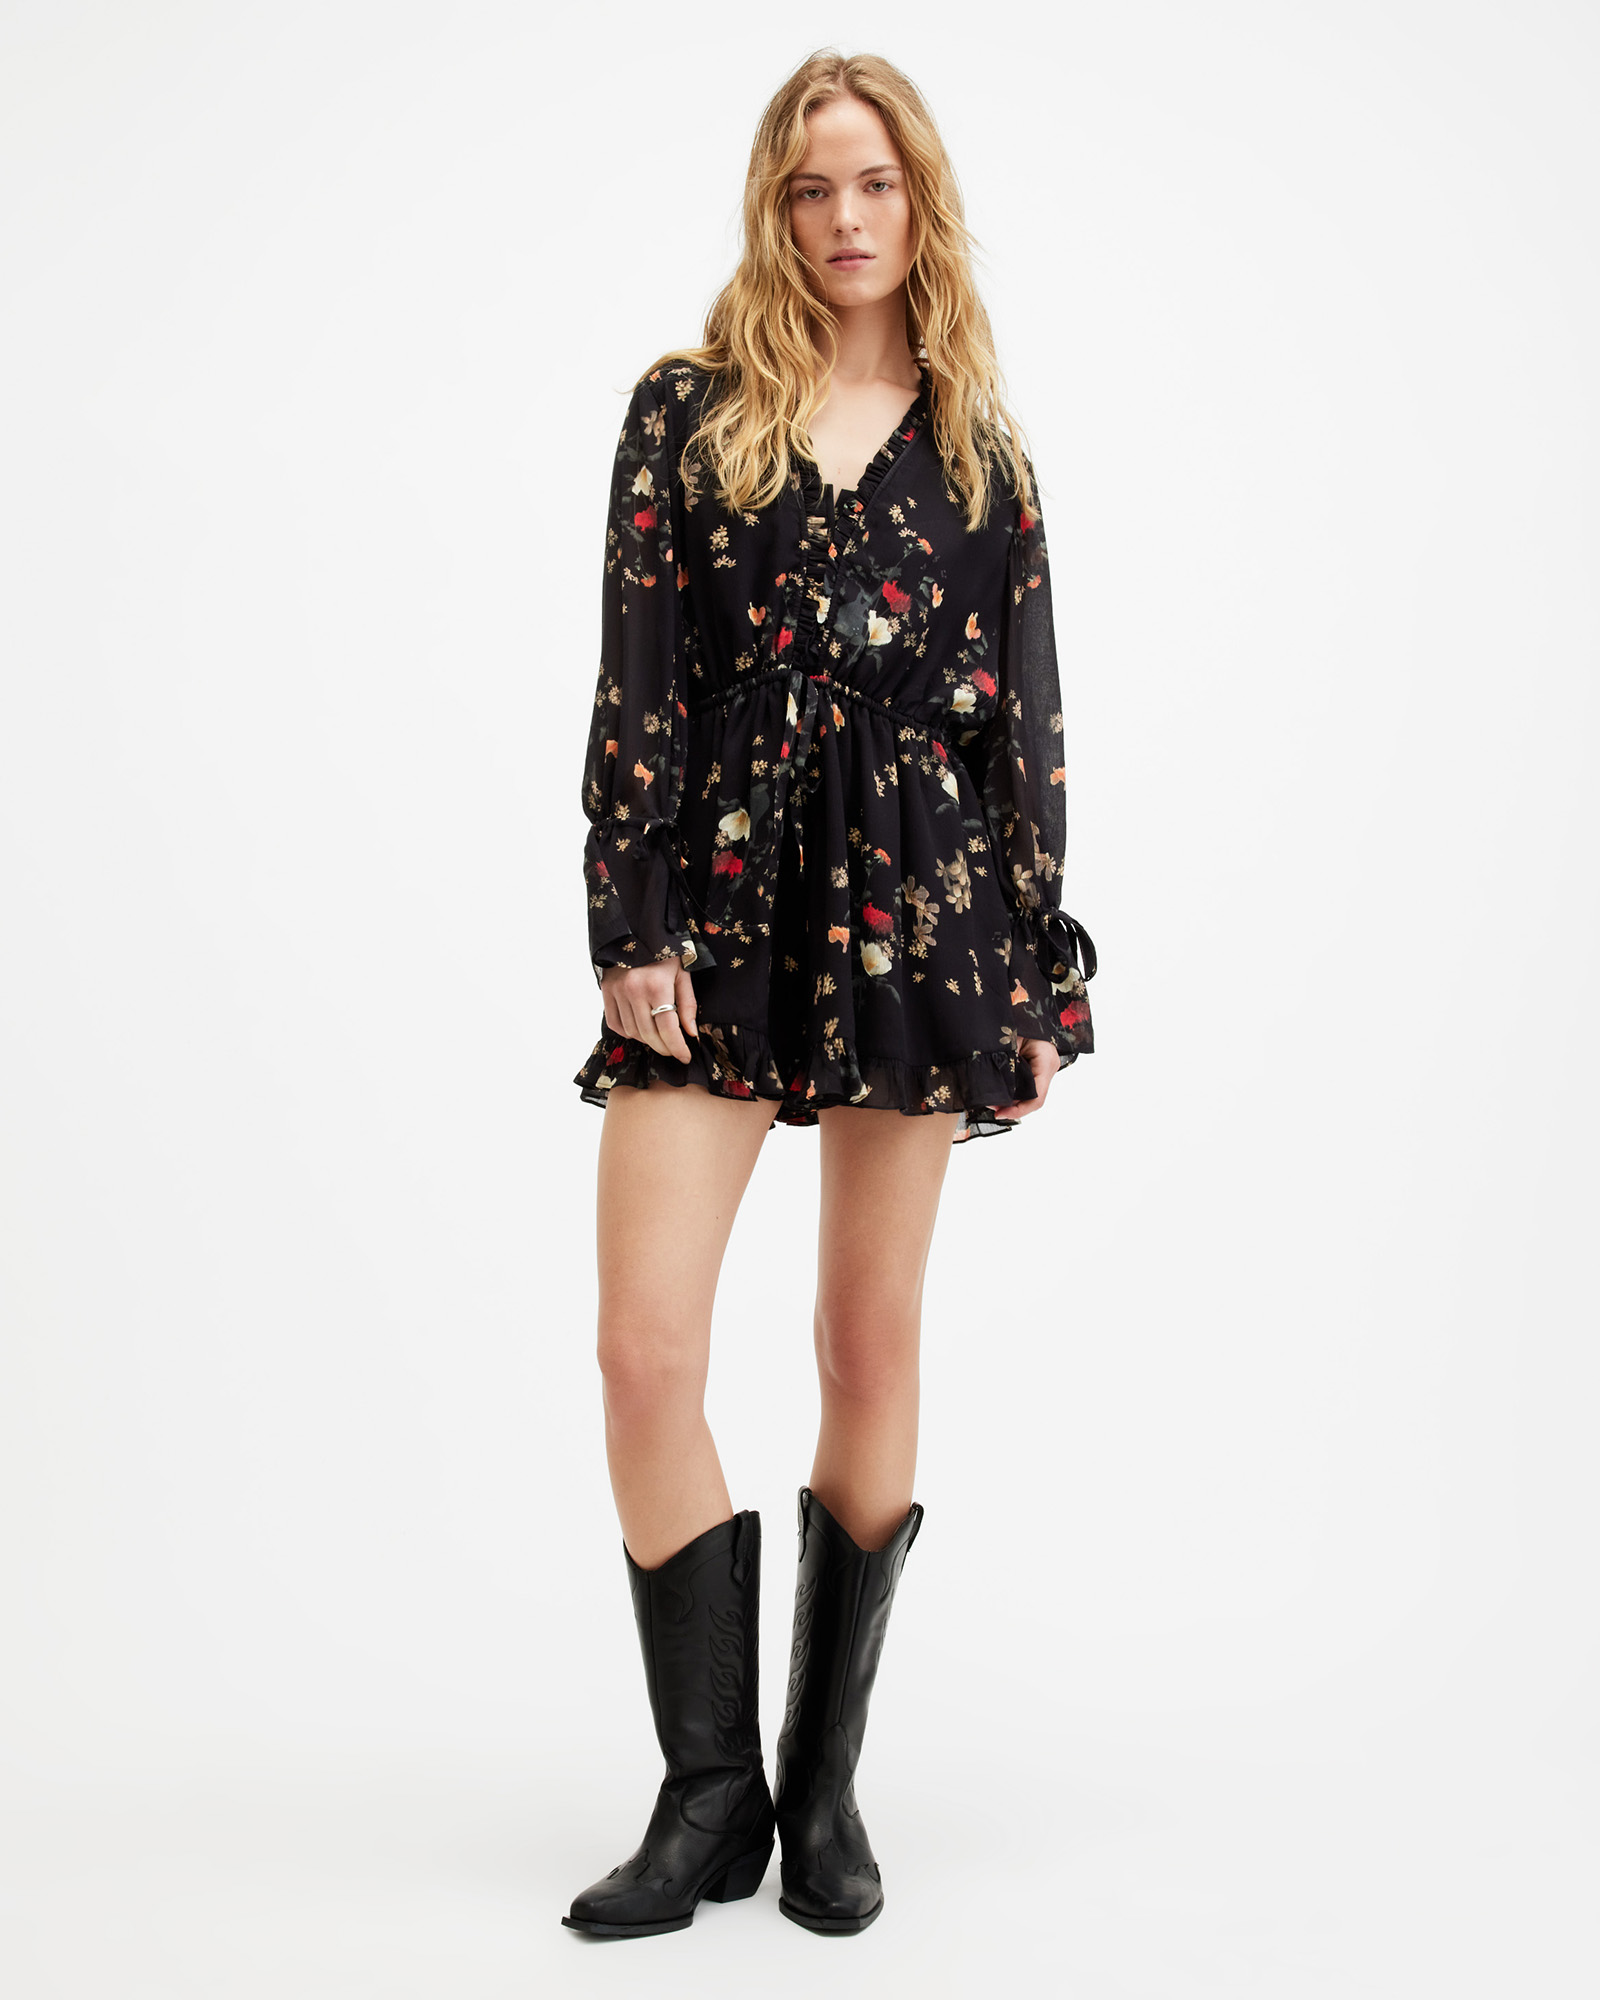 AllSaints Daria Floral Print Relaxed Fit Playsuit,, Black